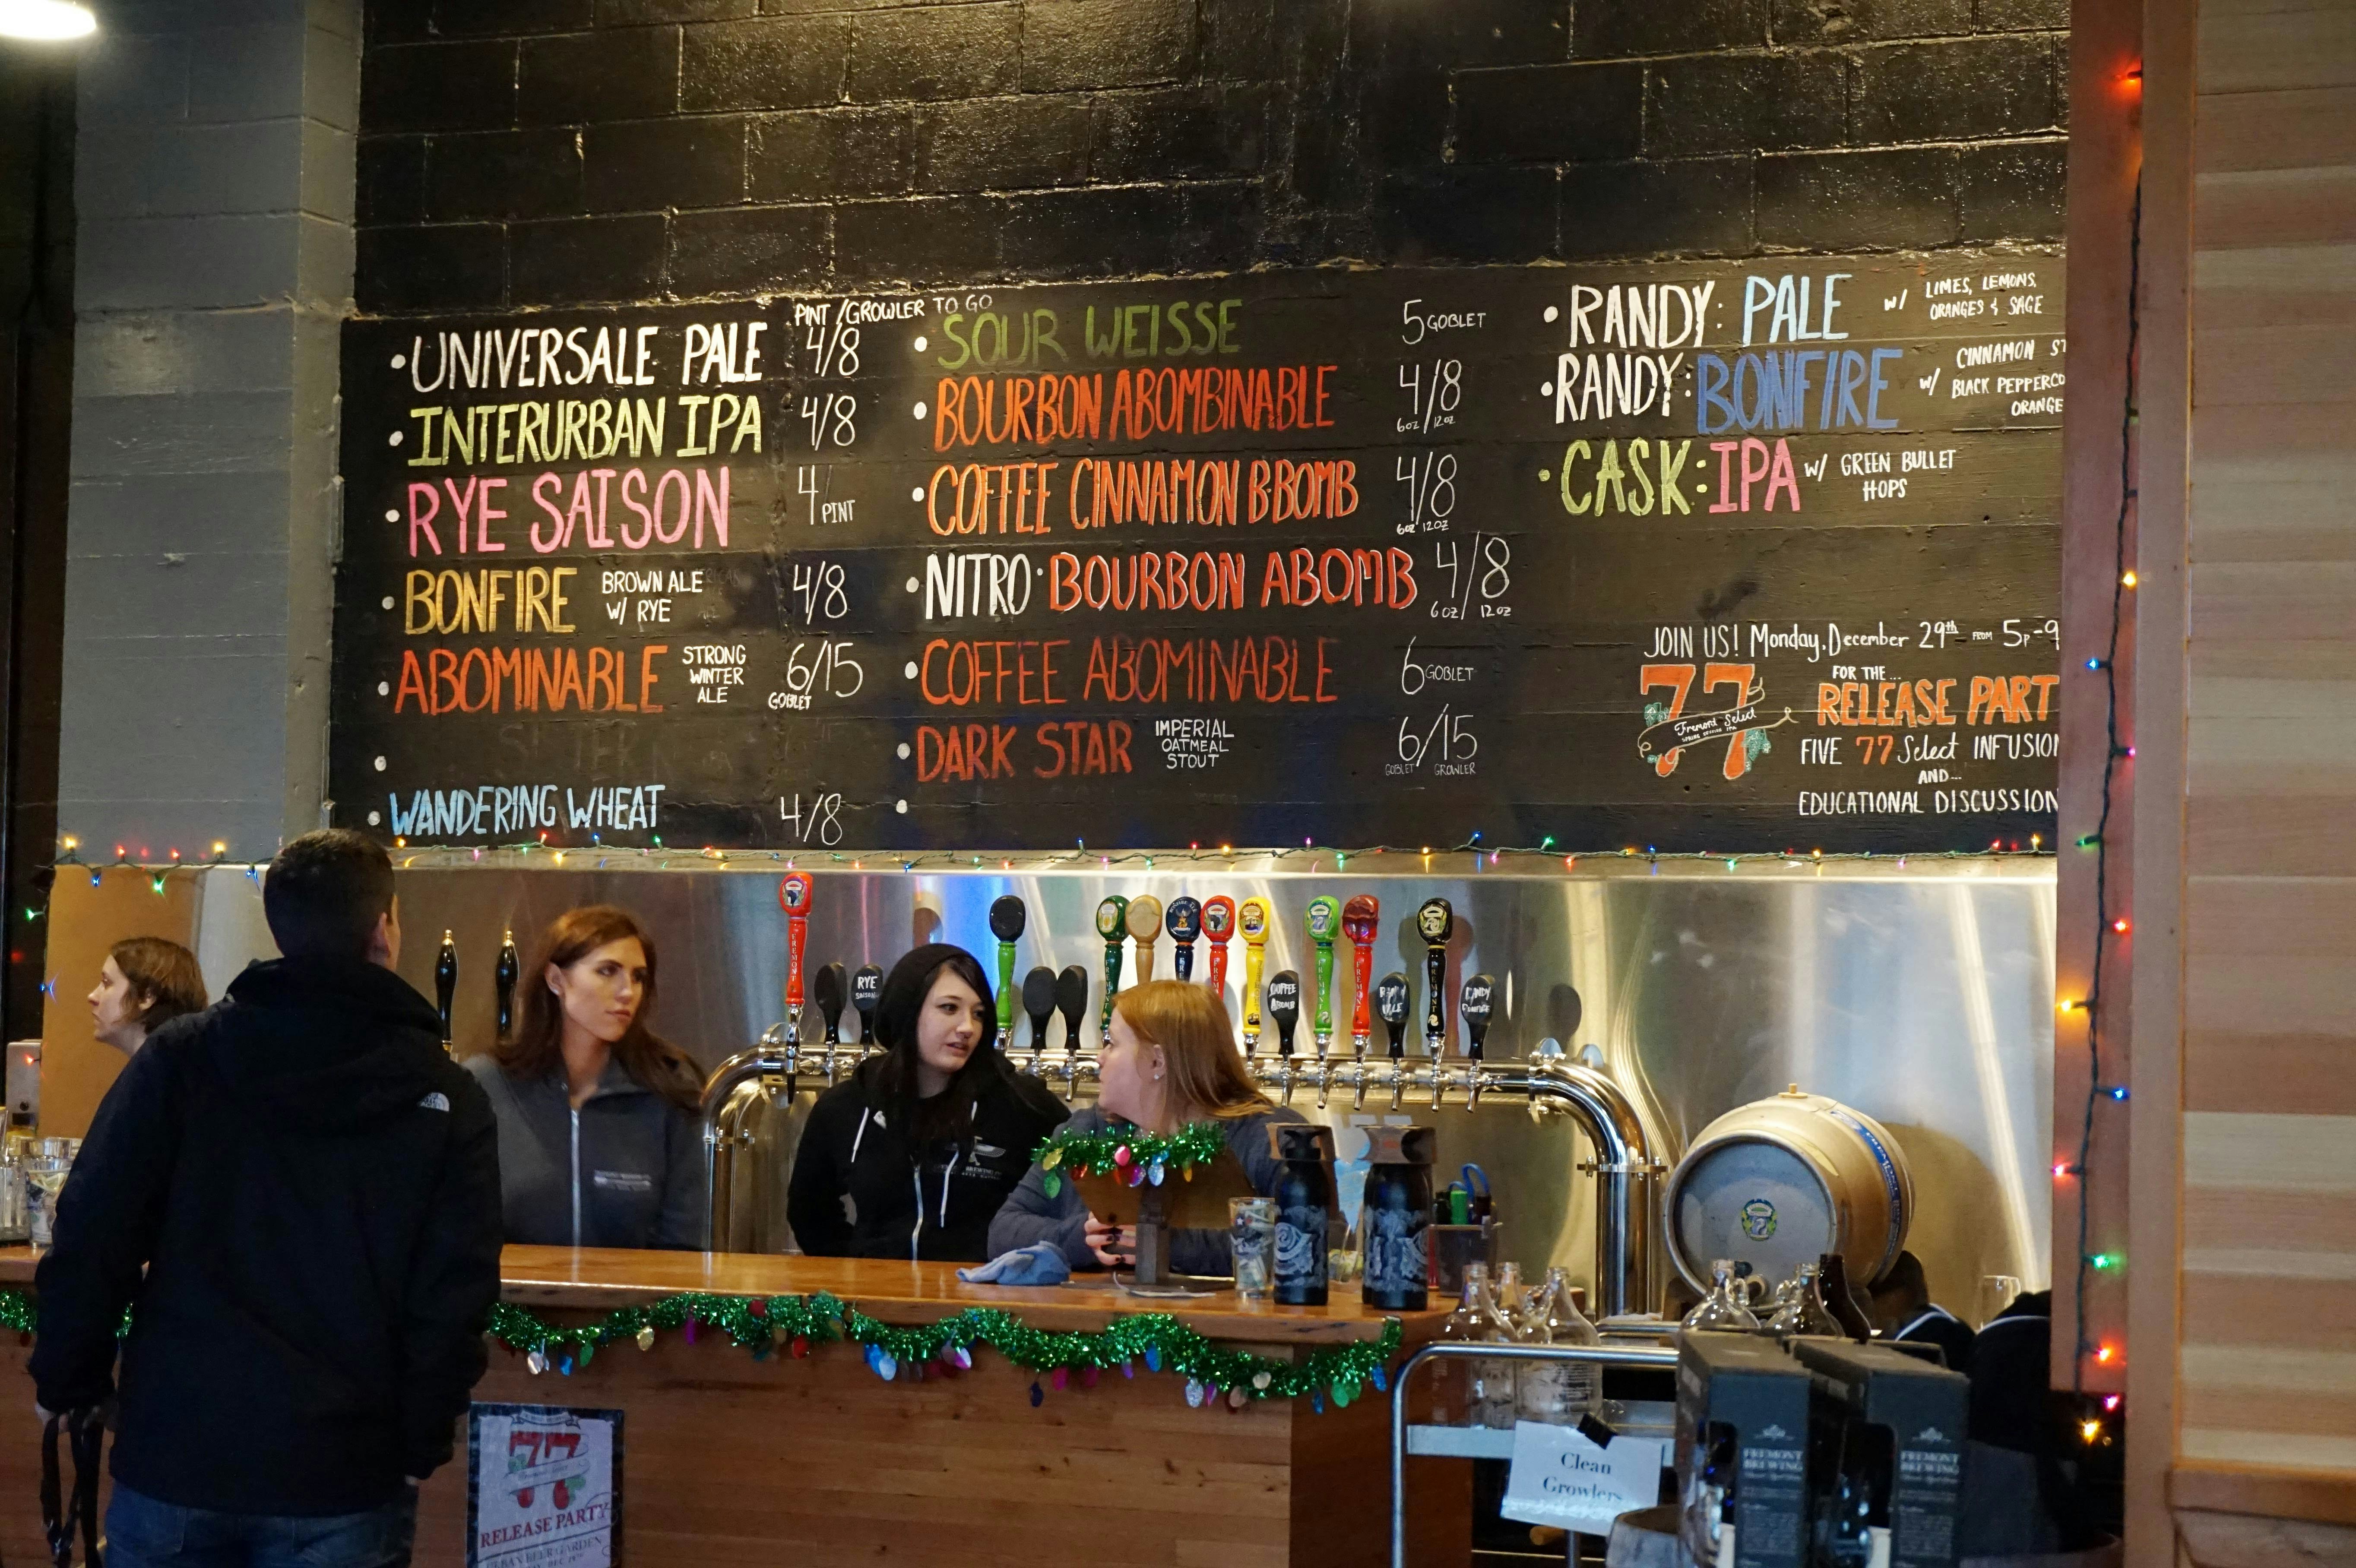 Fremont Brewing’s range of beers offered in the taproom. Image by Brendan Sainsbury / Lonely Planet